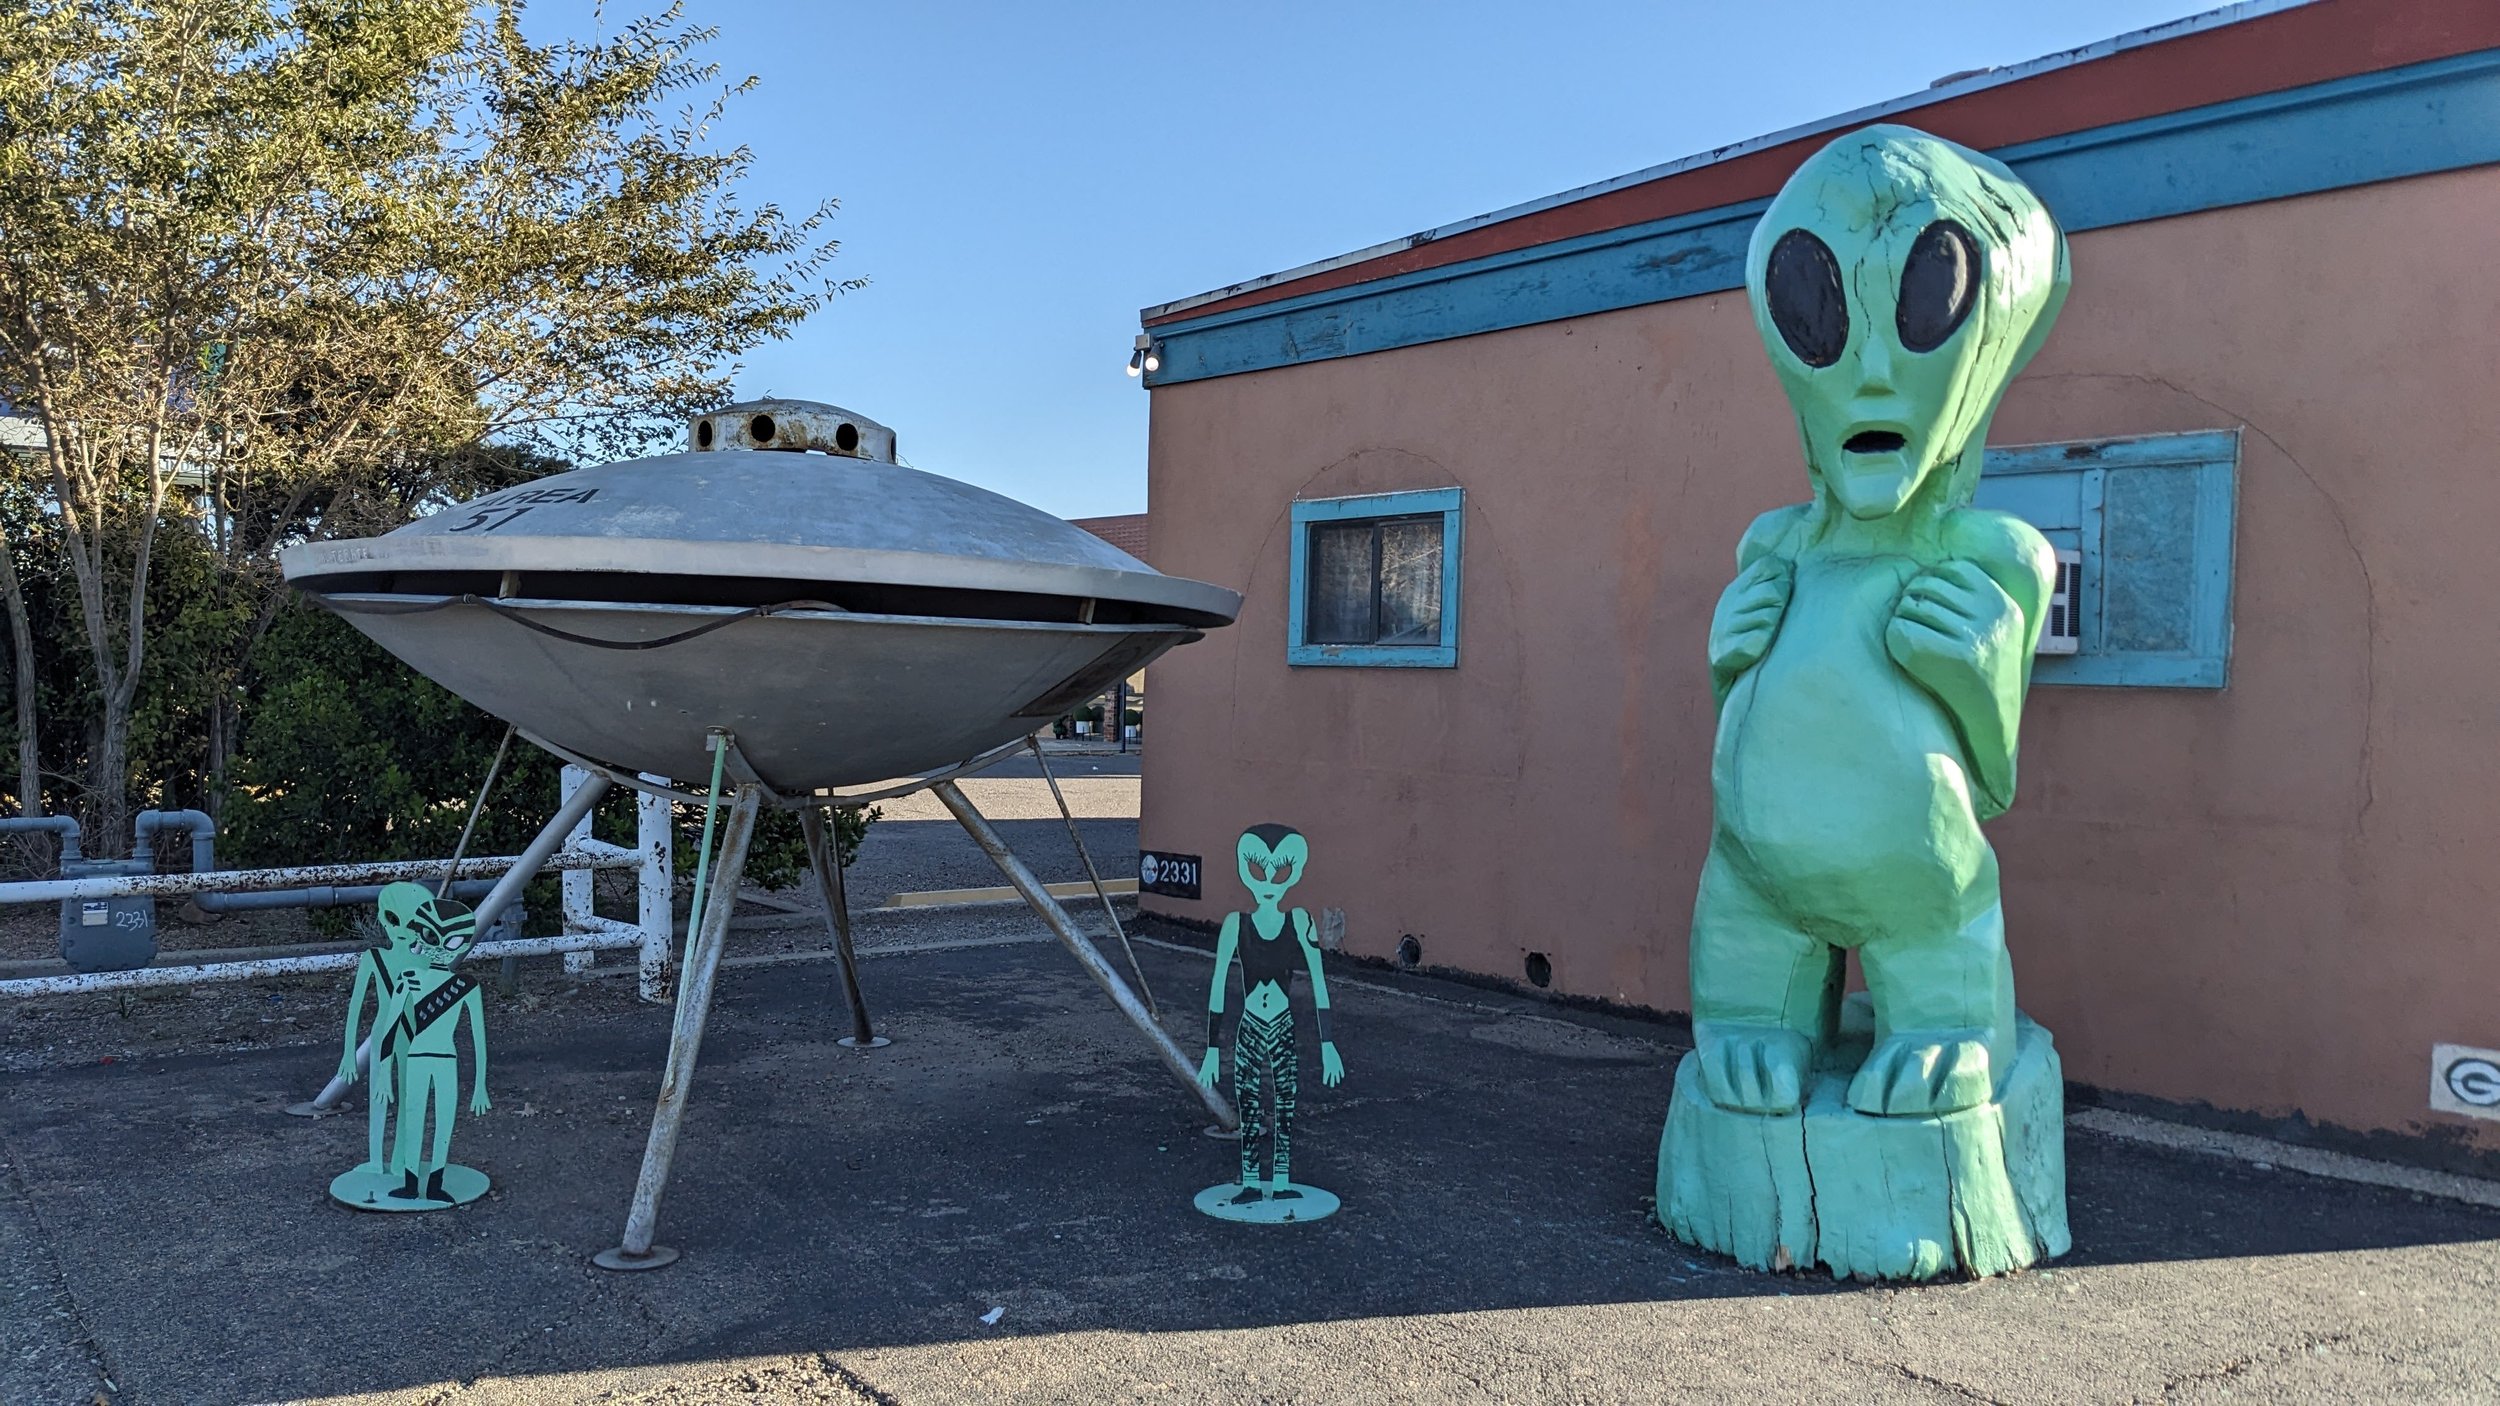 Aliens and Spaceship in Roswell New Mexico